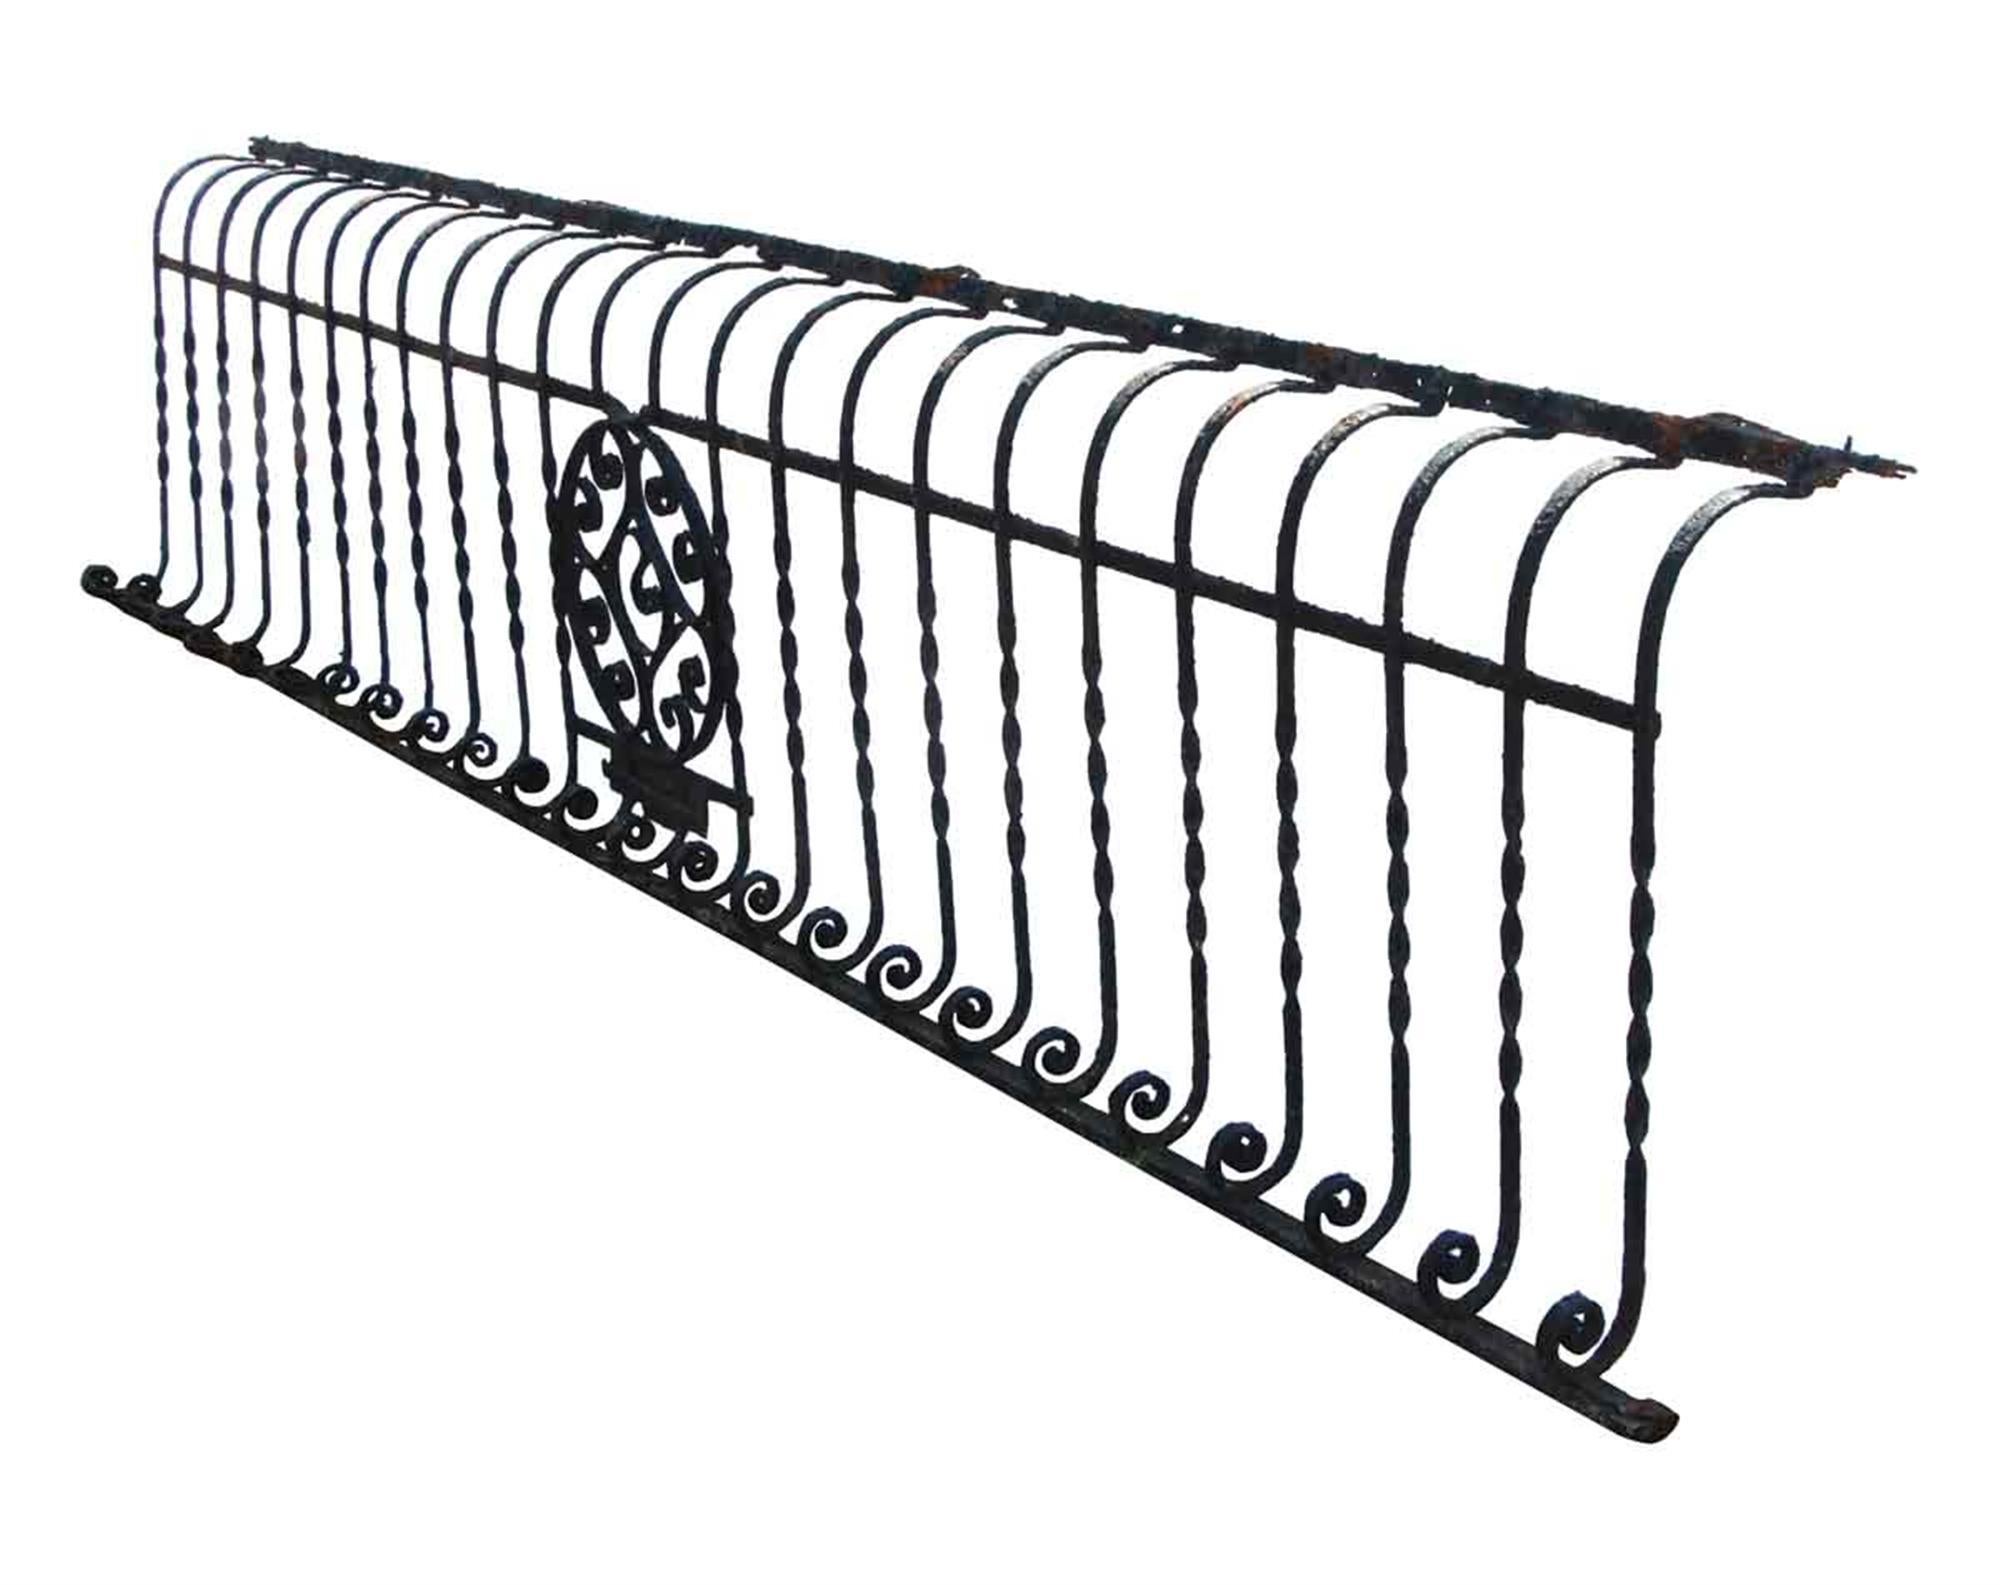 American 1880s Wrought Iron Bombay Balcony with Turns and Curls and a Central Medalion